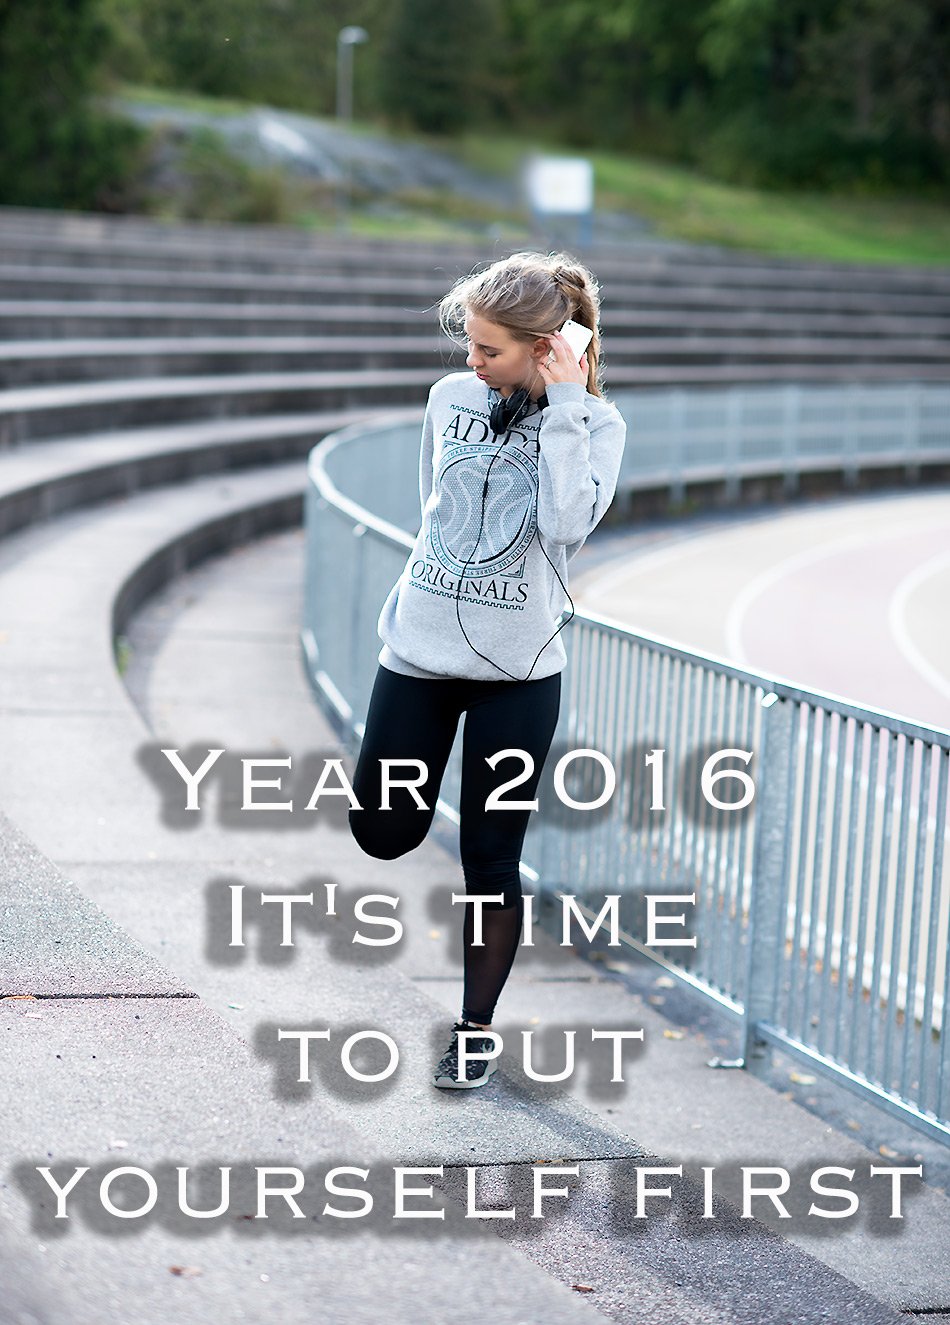 Year 2016 It's time to put yourself first